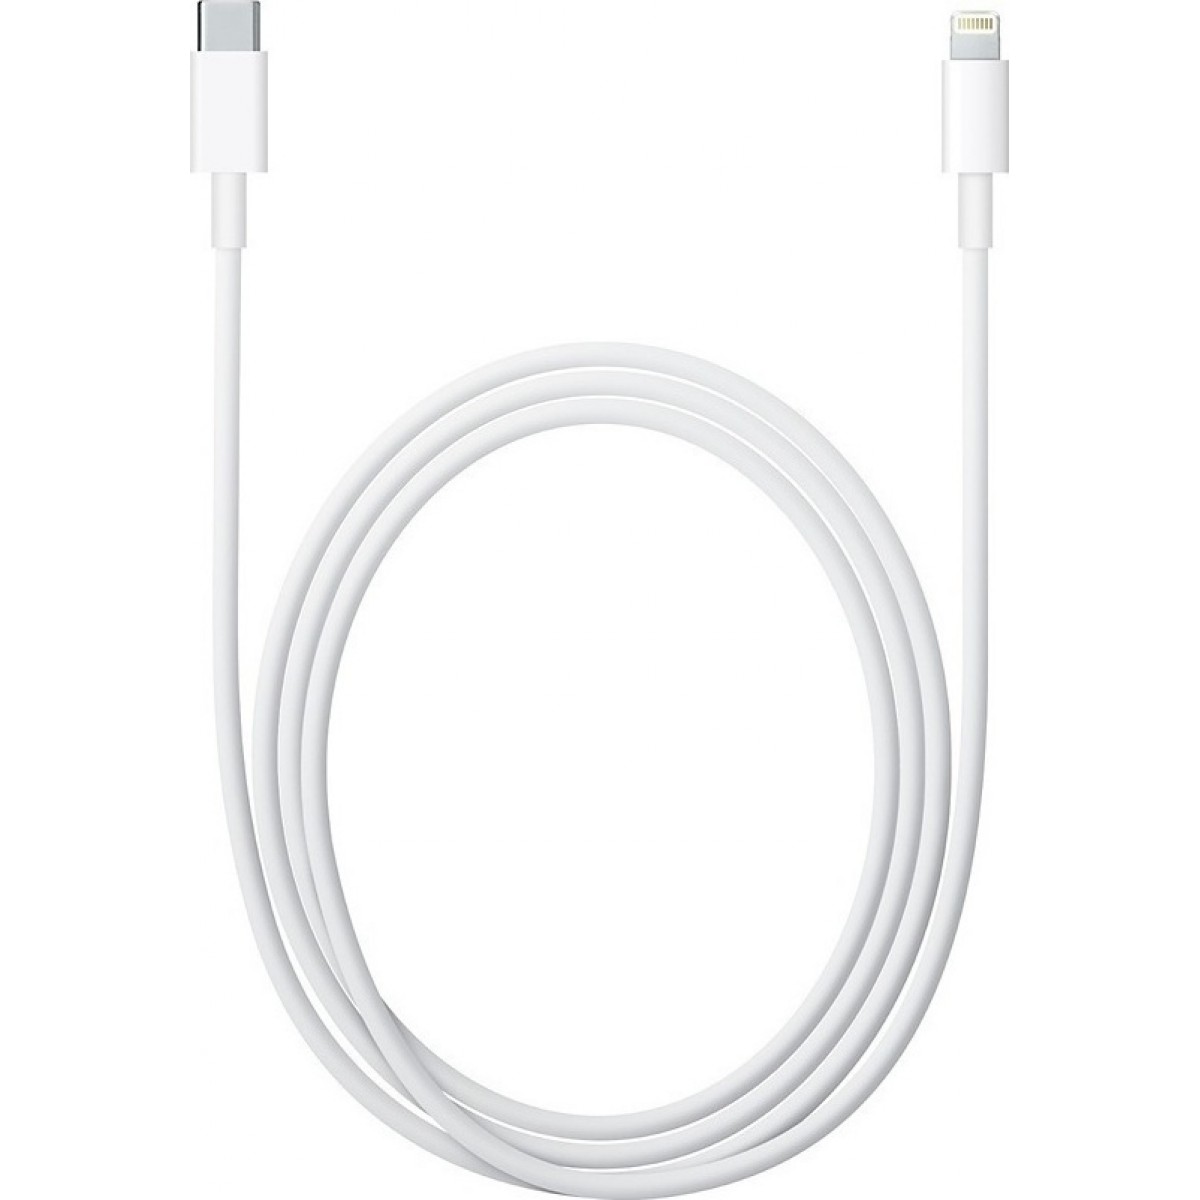 APPLE USB C TO LIGHTNING CABLE 2M MQGH2 BLISTER